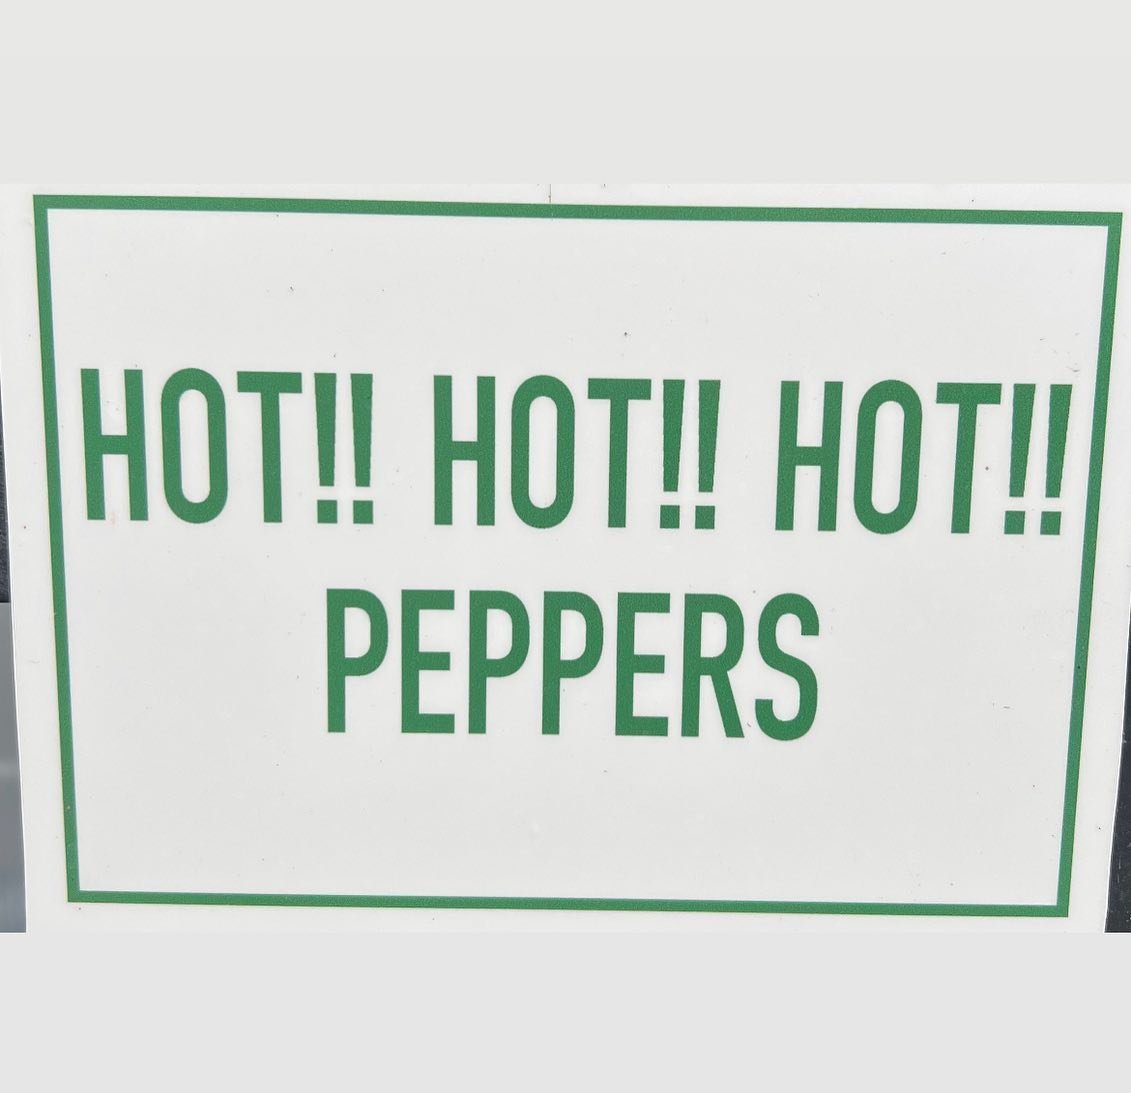 We&rsquo;ve got a range of pepper plants available, but most love the Hot Hot Hot peppers 🌶️ Carolina Reaper and Ghost Peppers 🥵